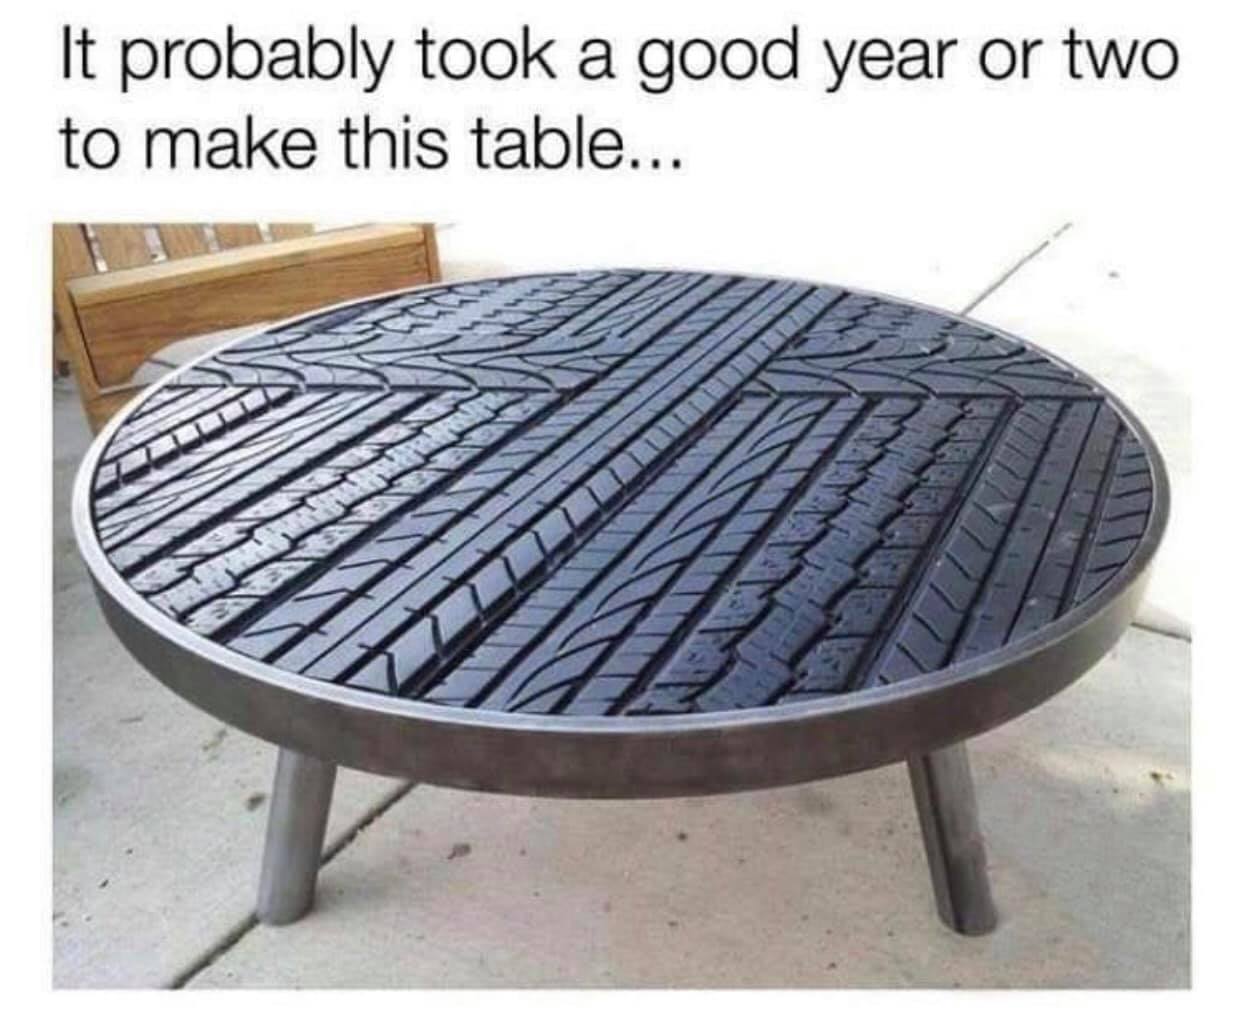 memes - goodyear tire table meme - It probably took a good year or two to make this table...